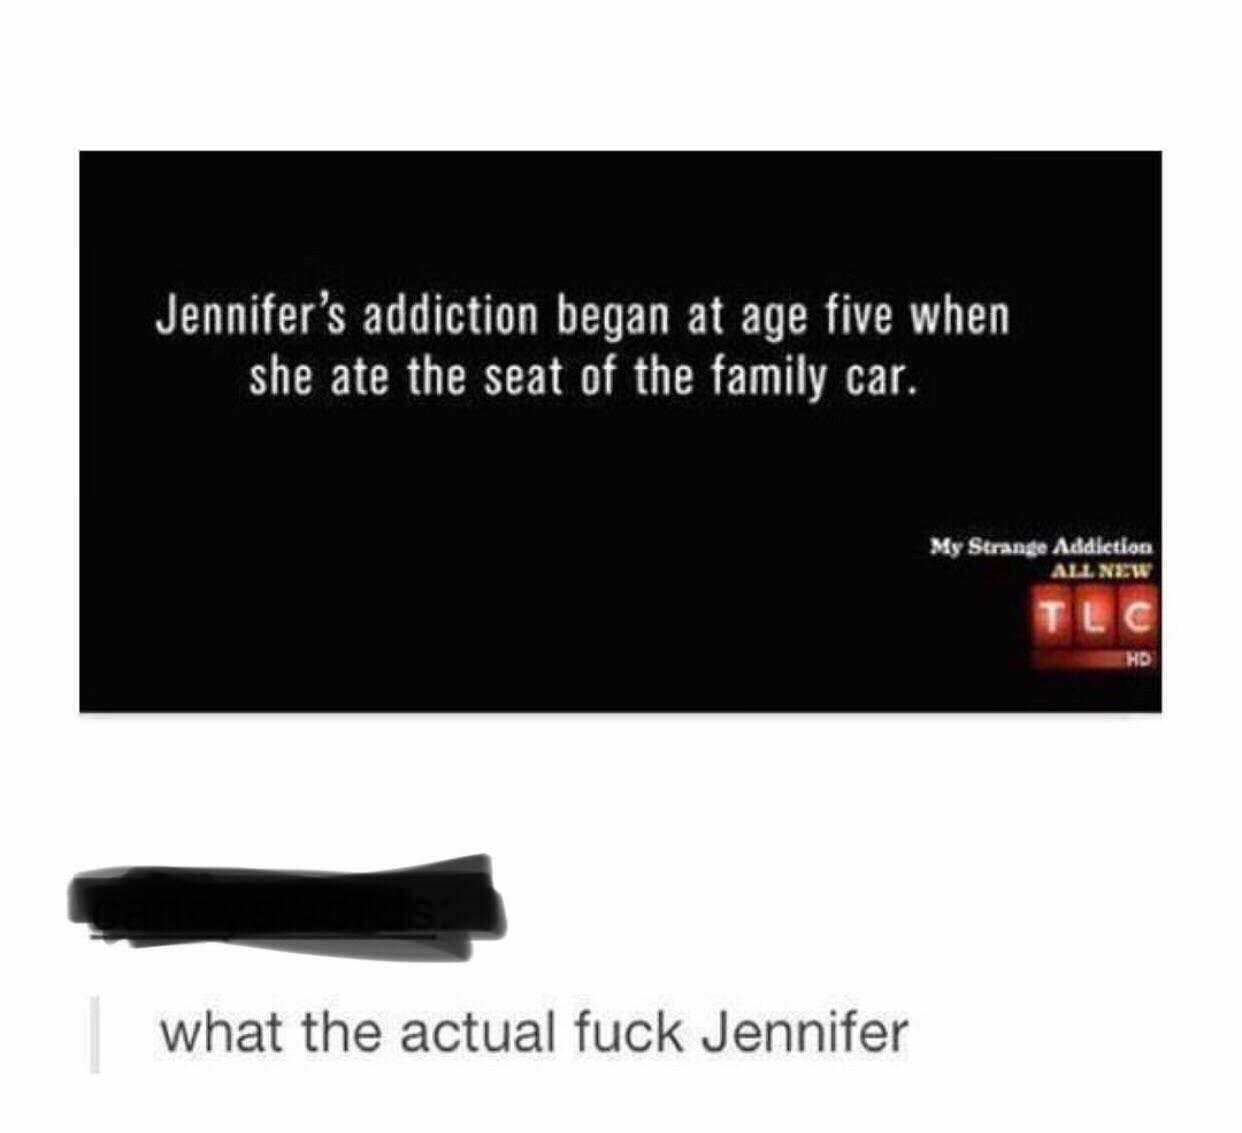 multimedia - Jennifer's addiction began at age five when she ate the seat of the family car. My Strange Addiction All New Hd what the actual fuck Jennifer